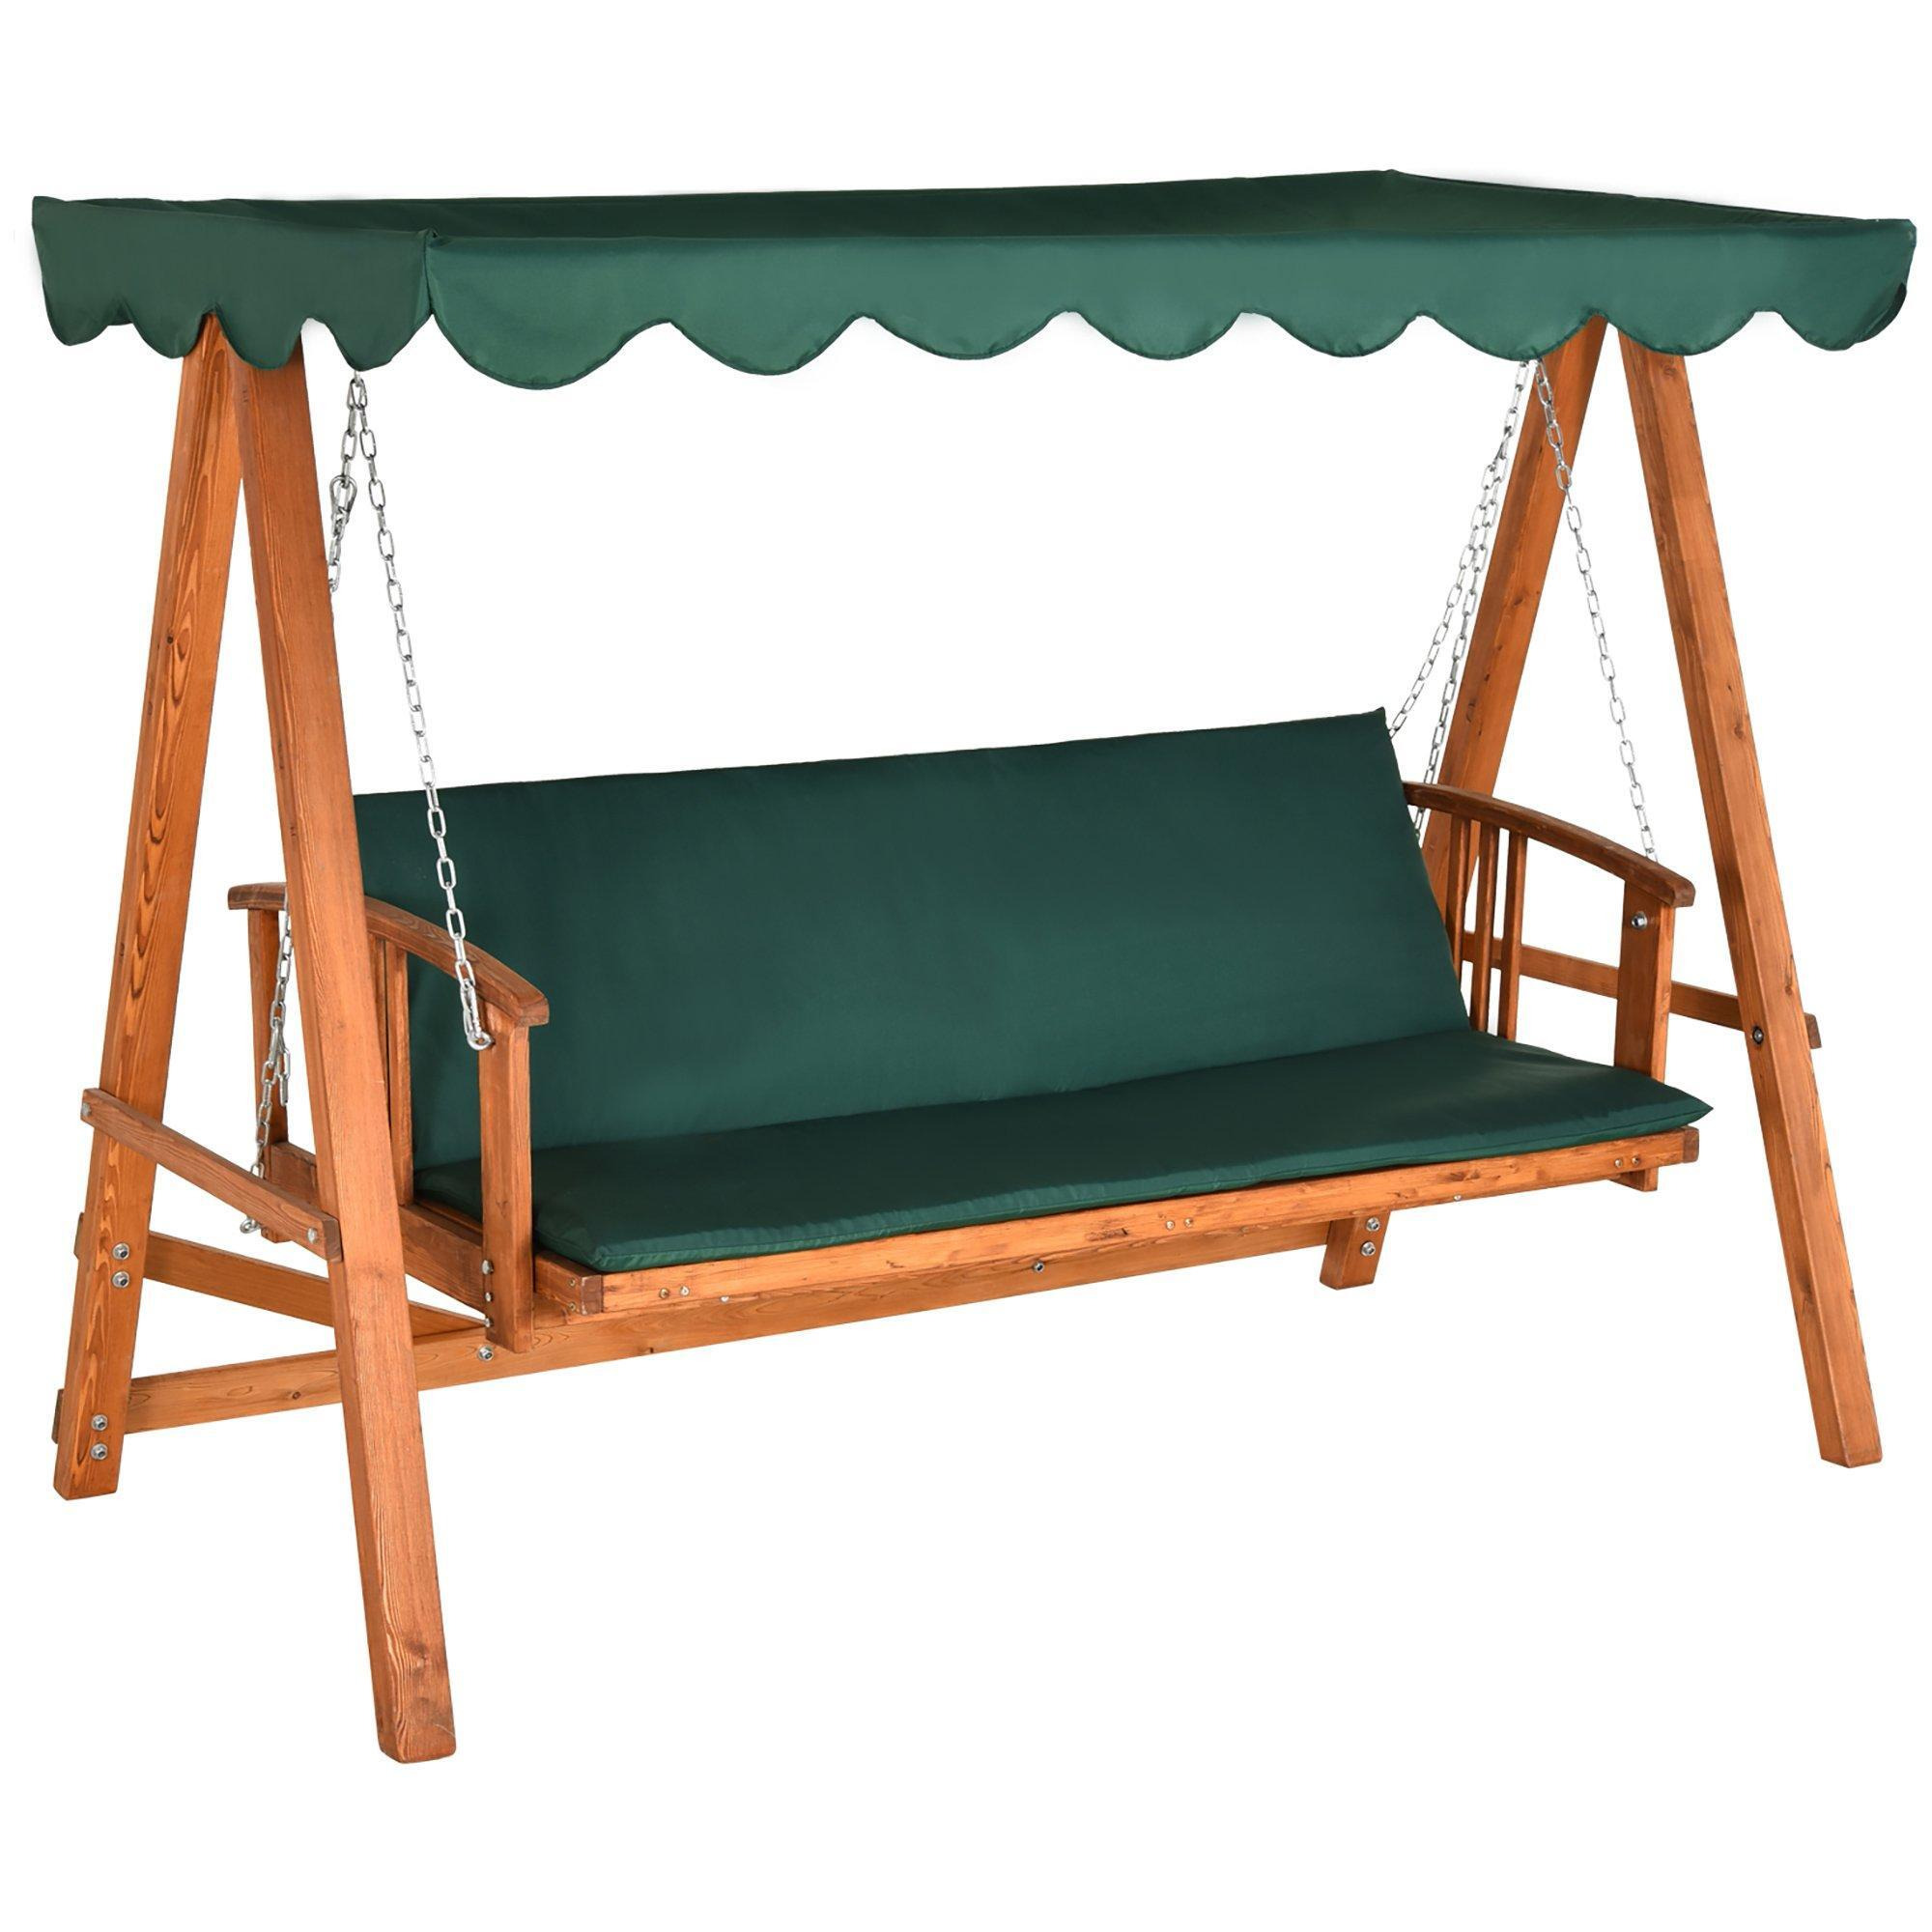 3 Seater Wooden Garden Swing Chair Seat Hammock Bench Lounger - image 1